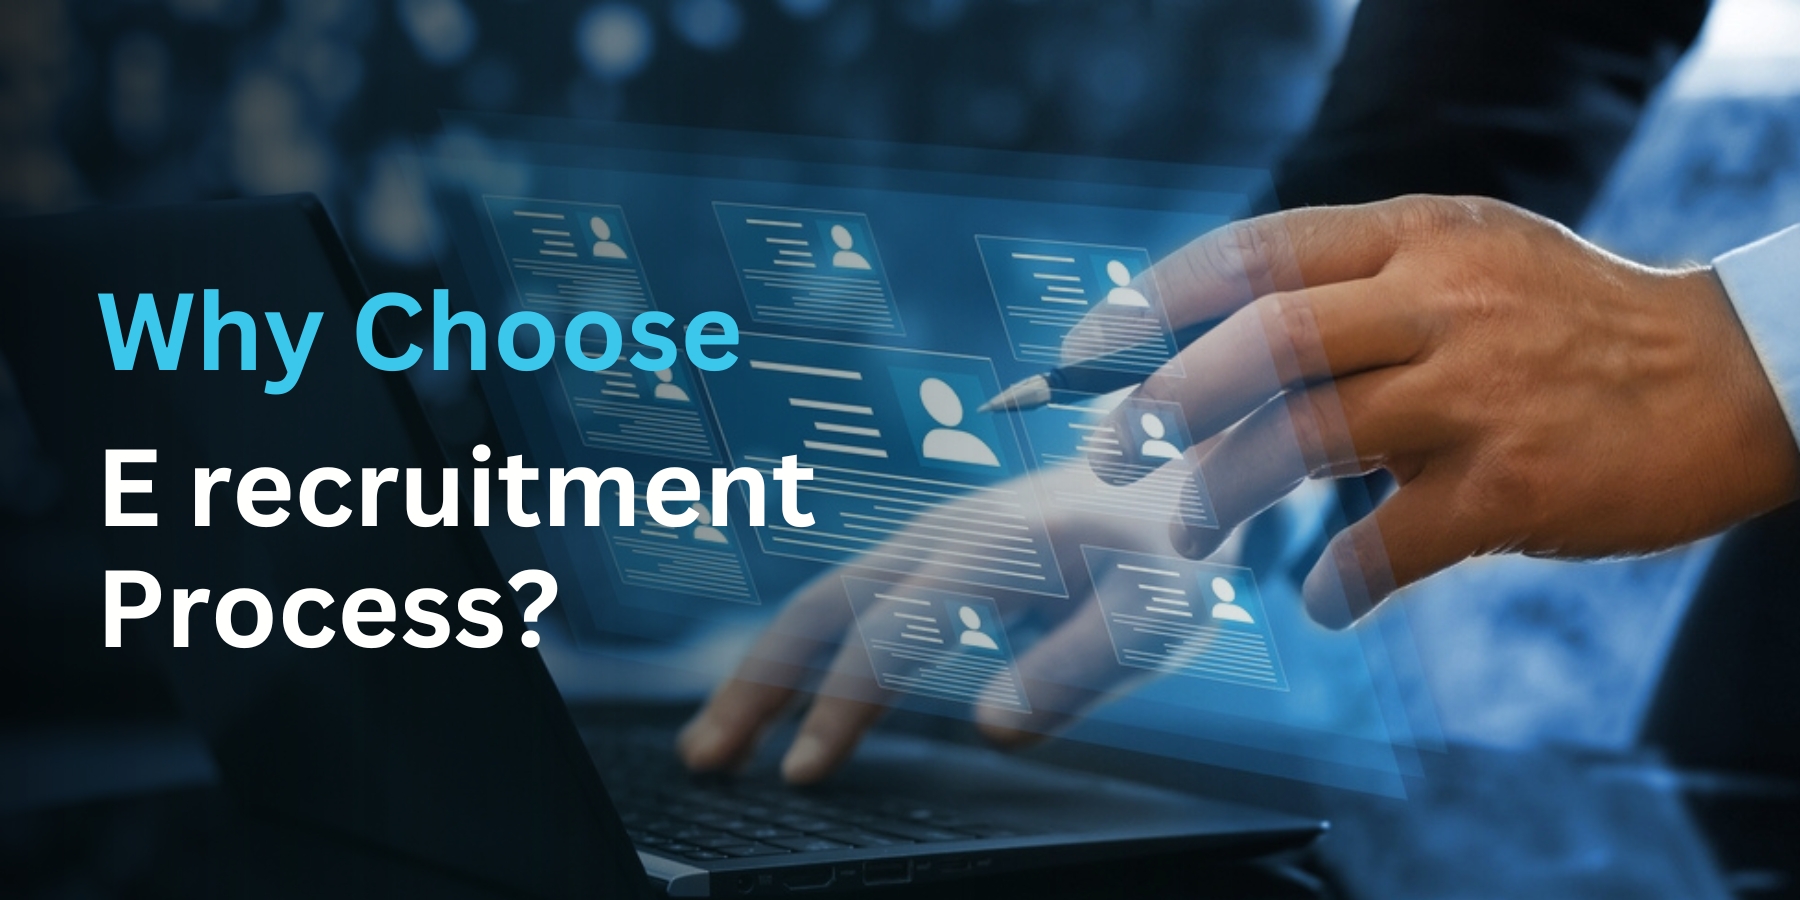 The Top 5 Benefits of E-Recruitment for Employers and Job Seekers